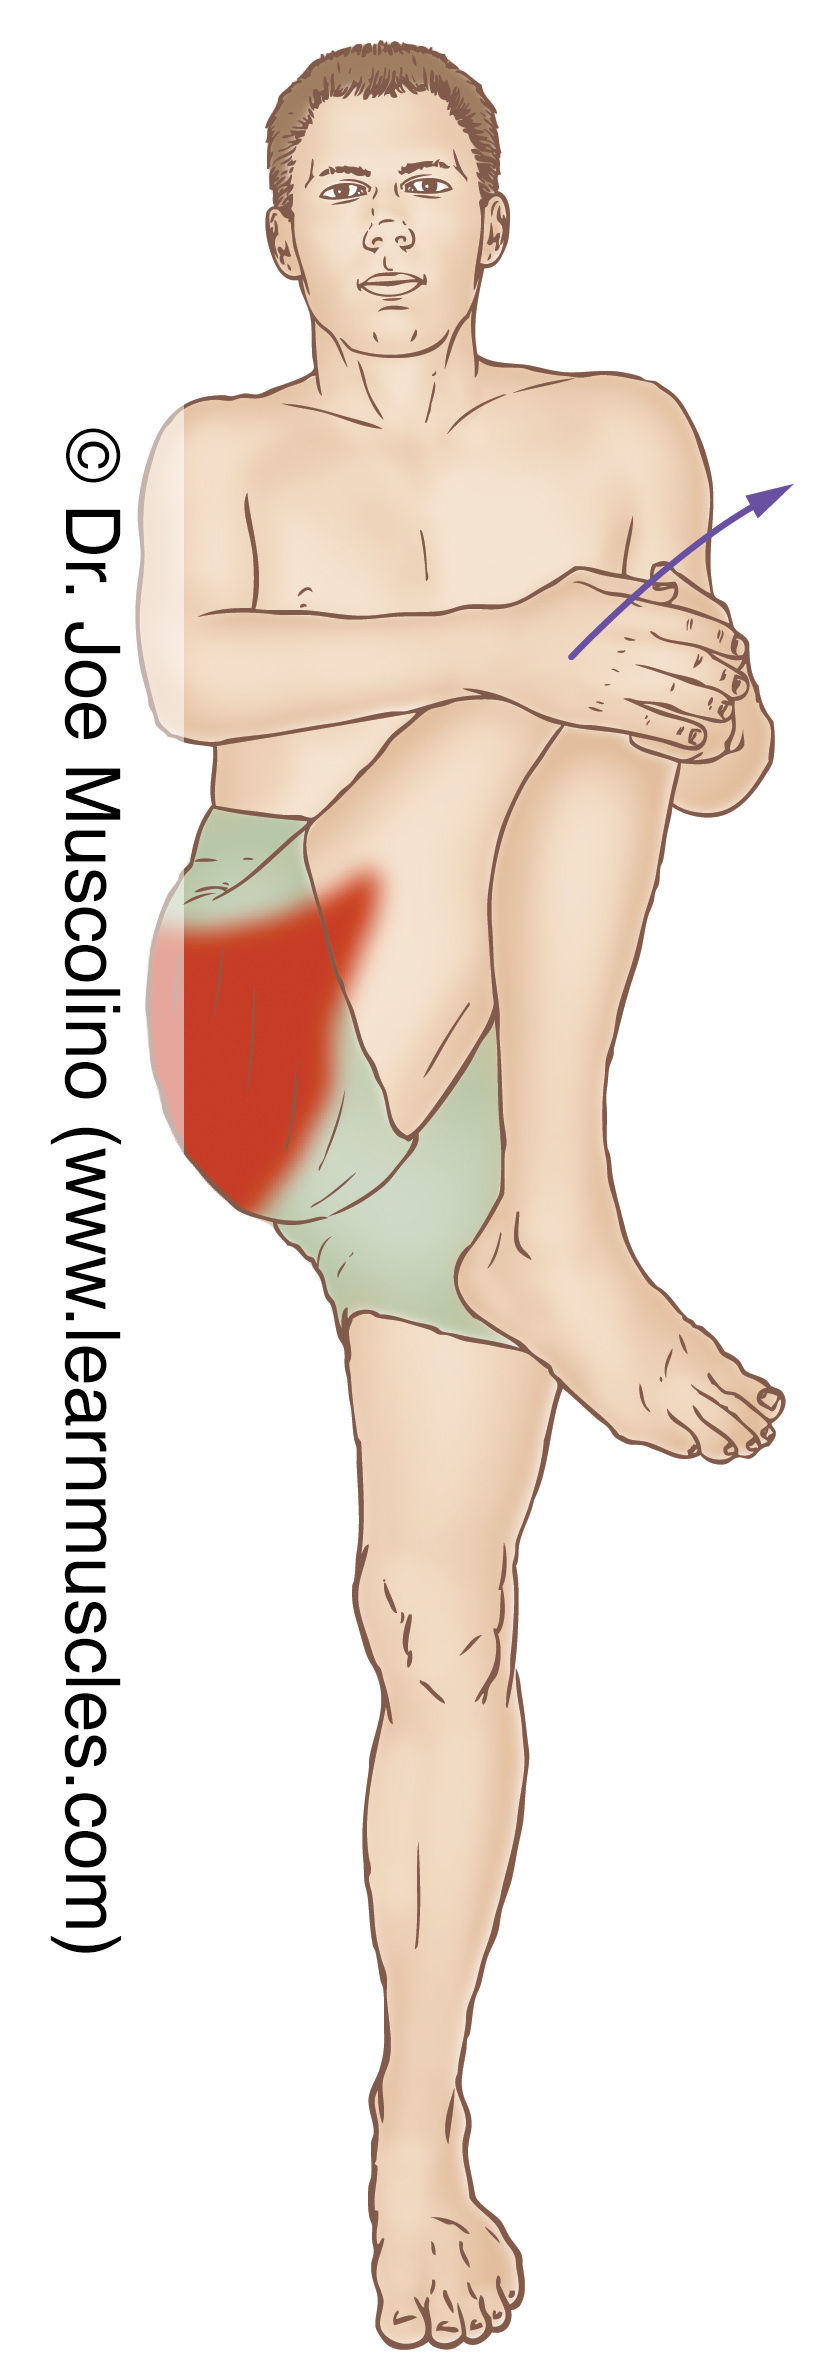 Gluteus Maximus - Stretching - Learn Muscles